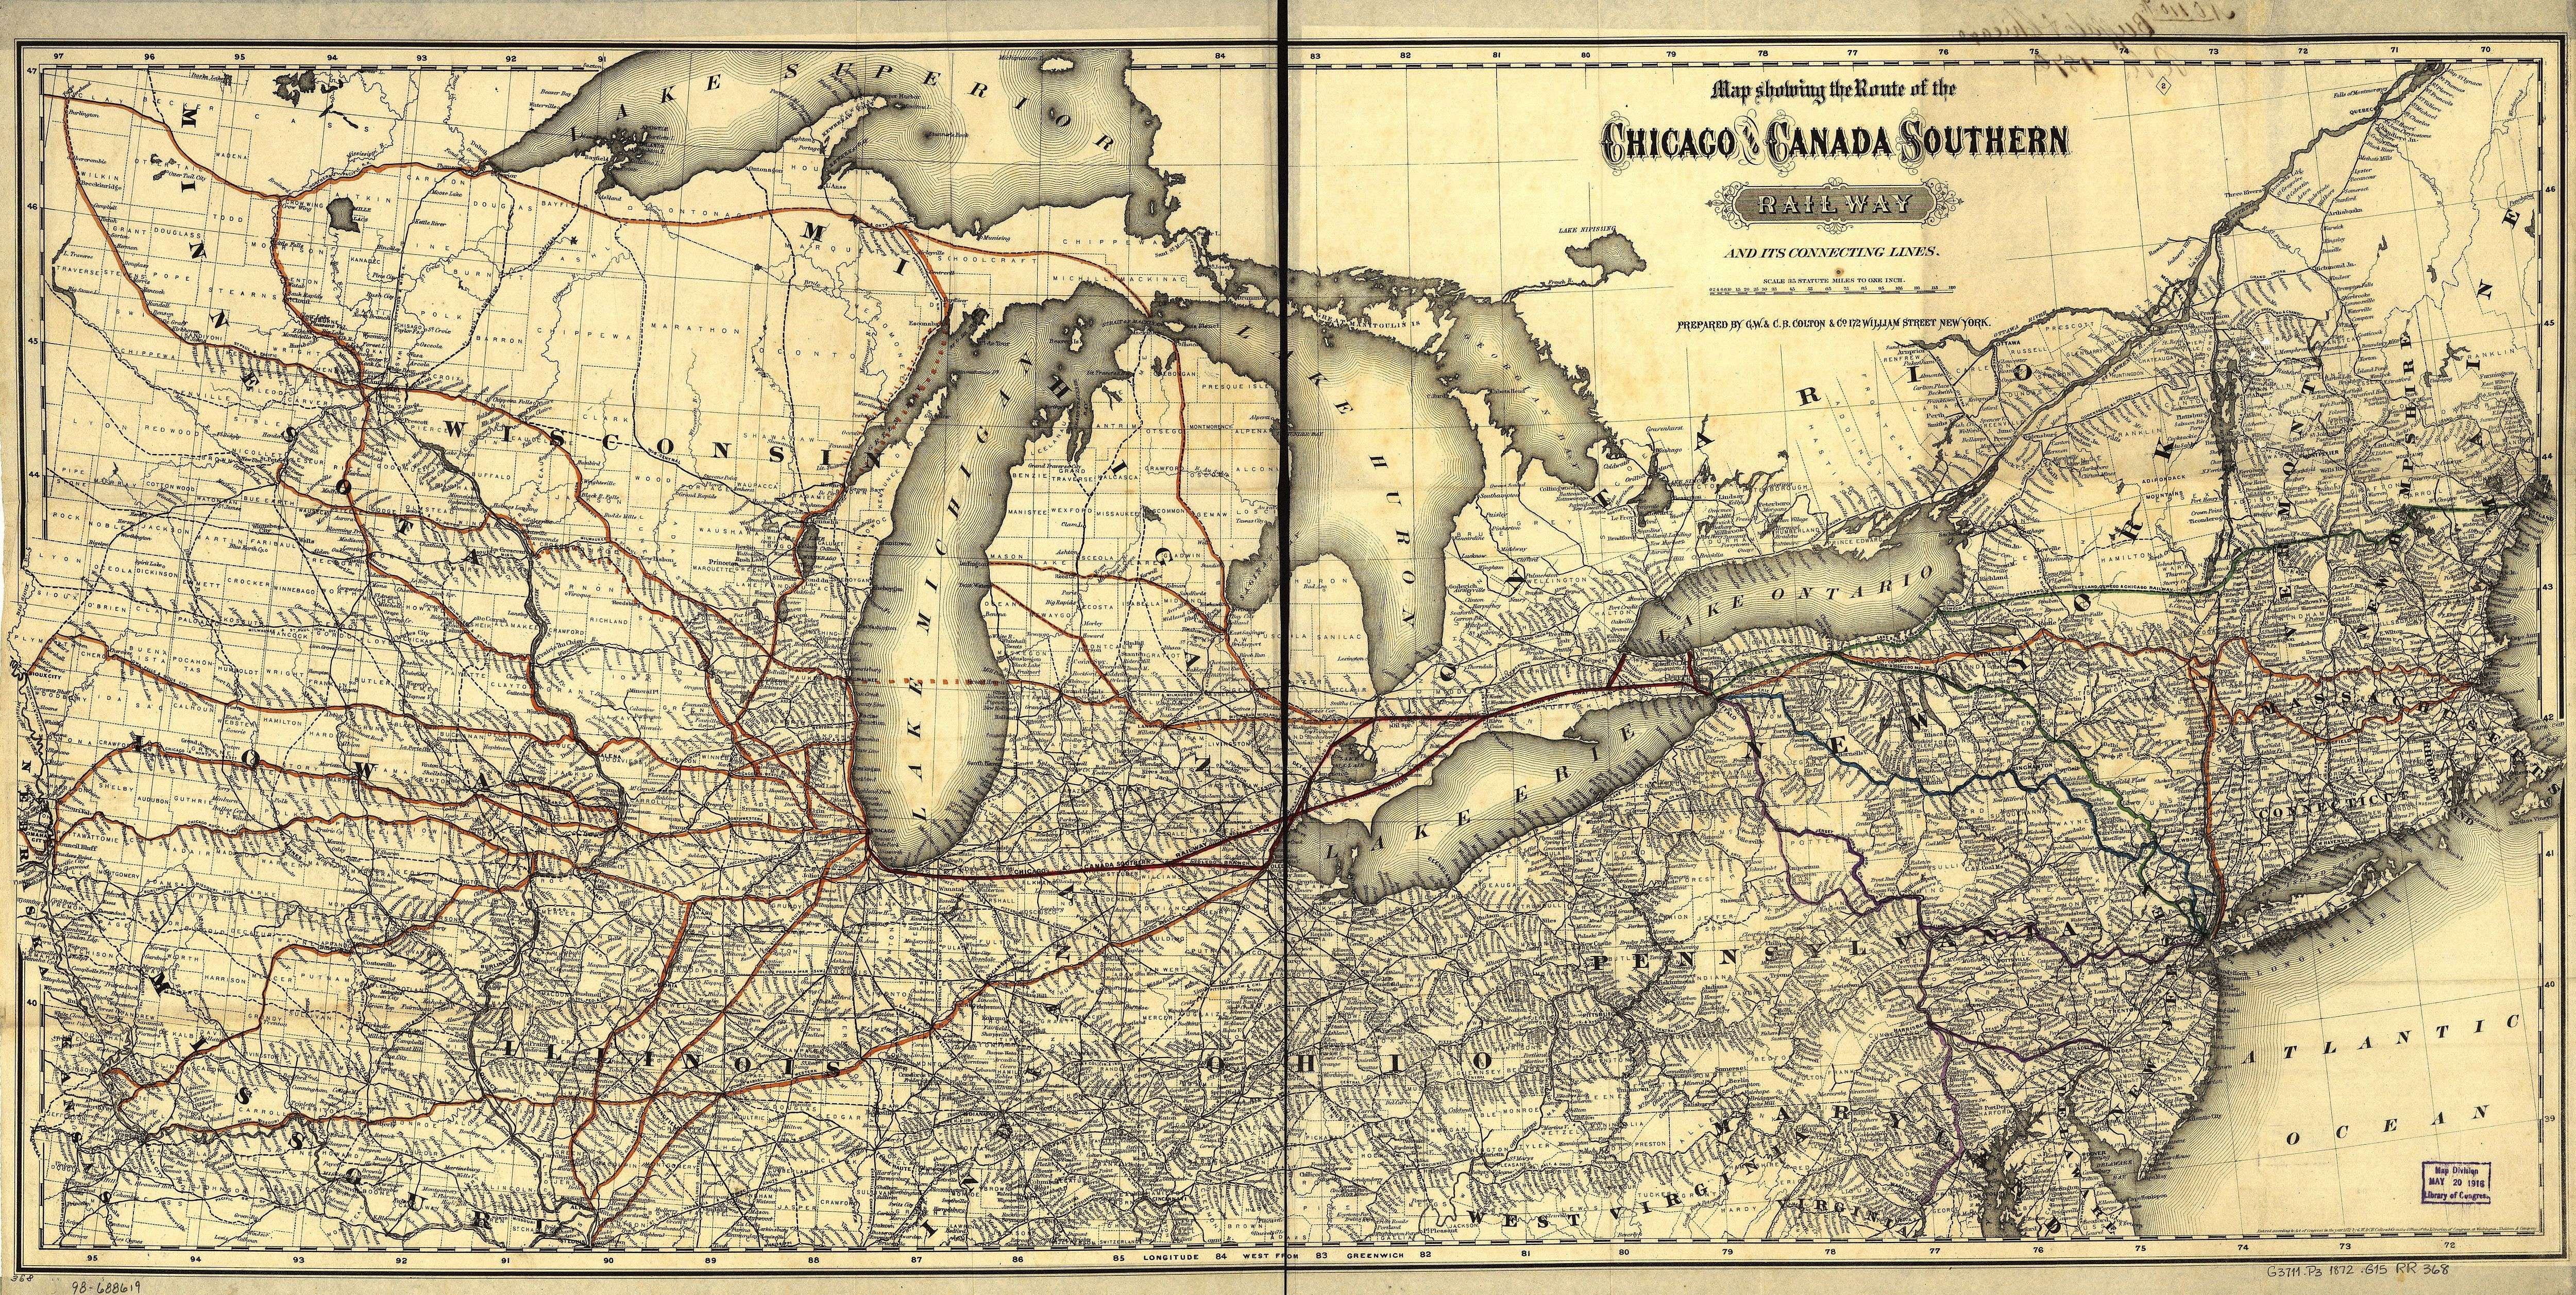 In this 1872 map, one can see the three clusters of islands that comprised Manitou County: the Beaver Island Archipelago (labeled), then Fox Islands (north of Leelanau county), and North Manitou Island & South Manitou Island (to the left of Northport)